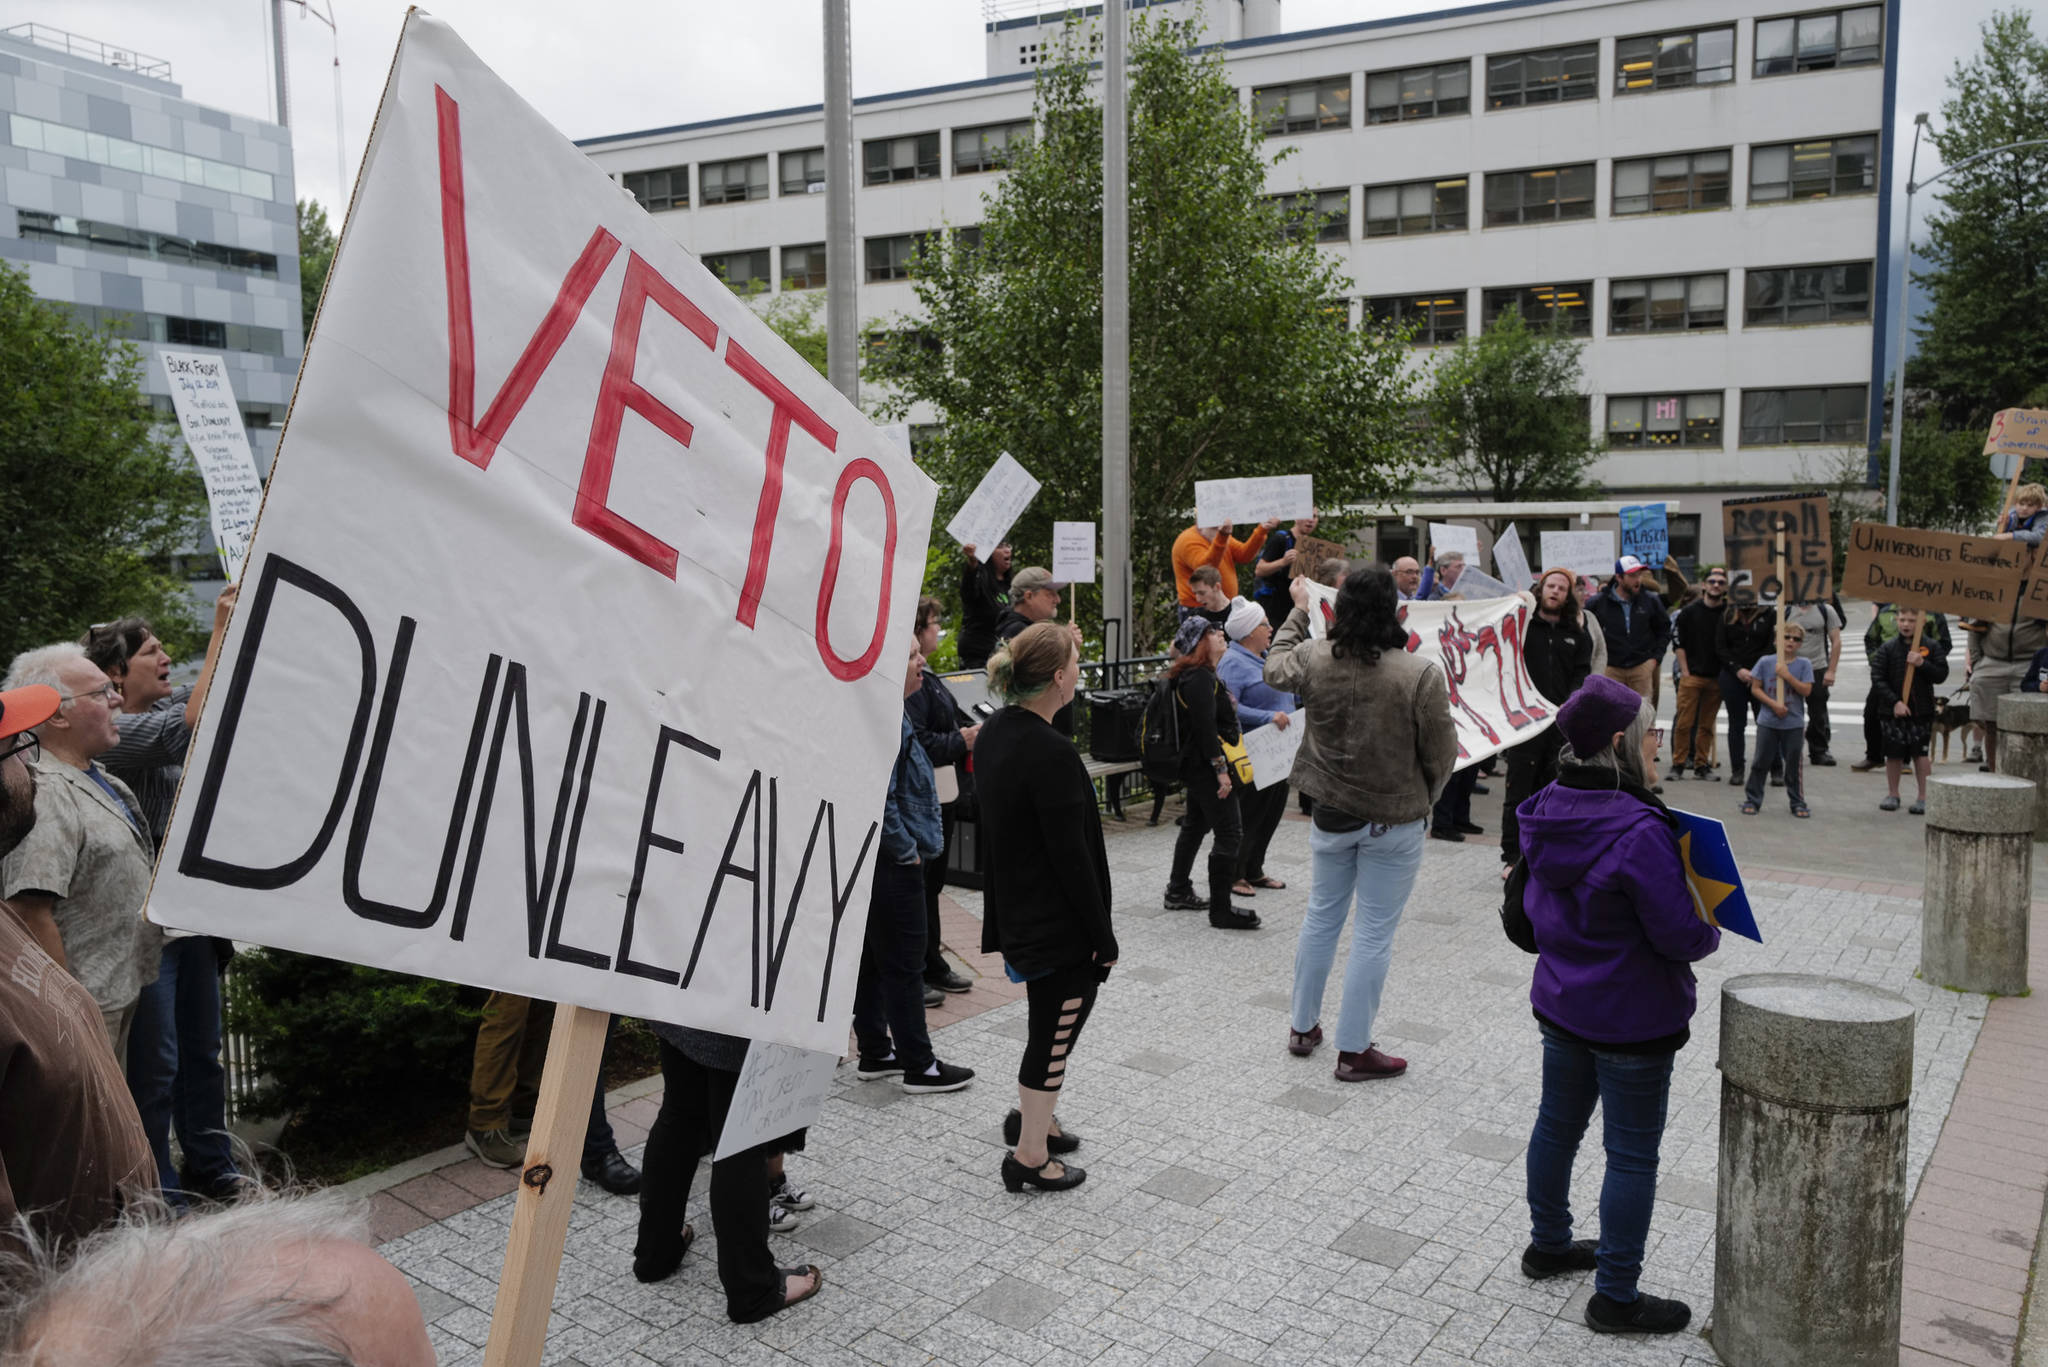 Over hundred people attend a rally starting at the Capitol to protest budget vetoes by Gov. Mike Dunleavy on Friday, July 12, 2019. (Michael Penn | Juneau Empire)